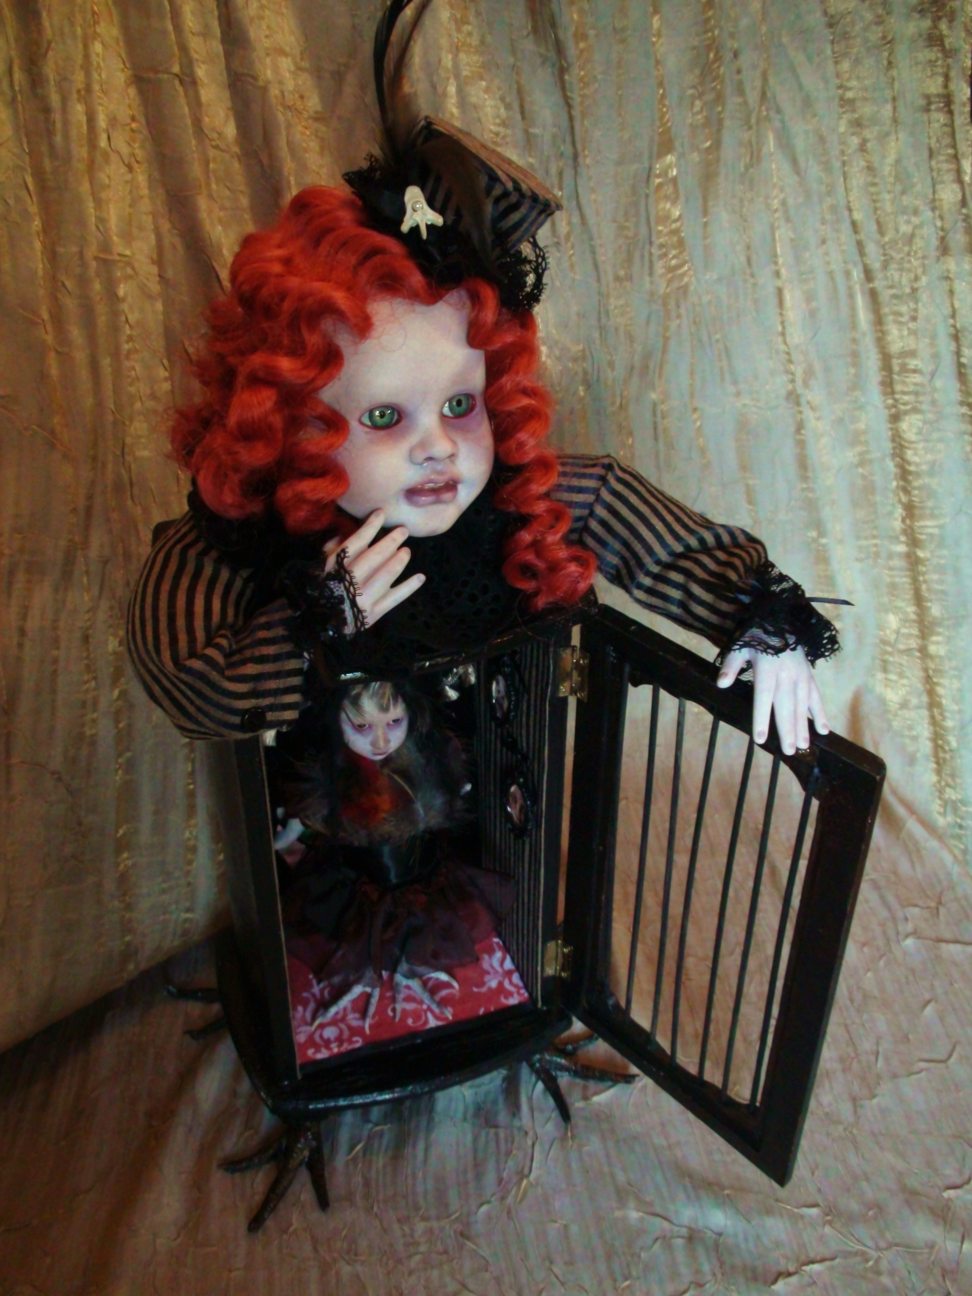 gothic redhead artdoll wearing stripes with cage cabinet body holds a miniature feathered porcelain doll with taxidermy birdfeet.